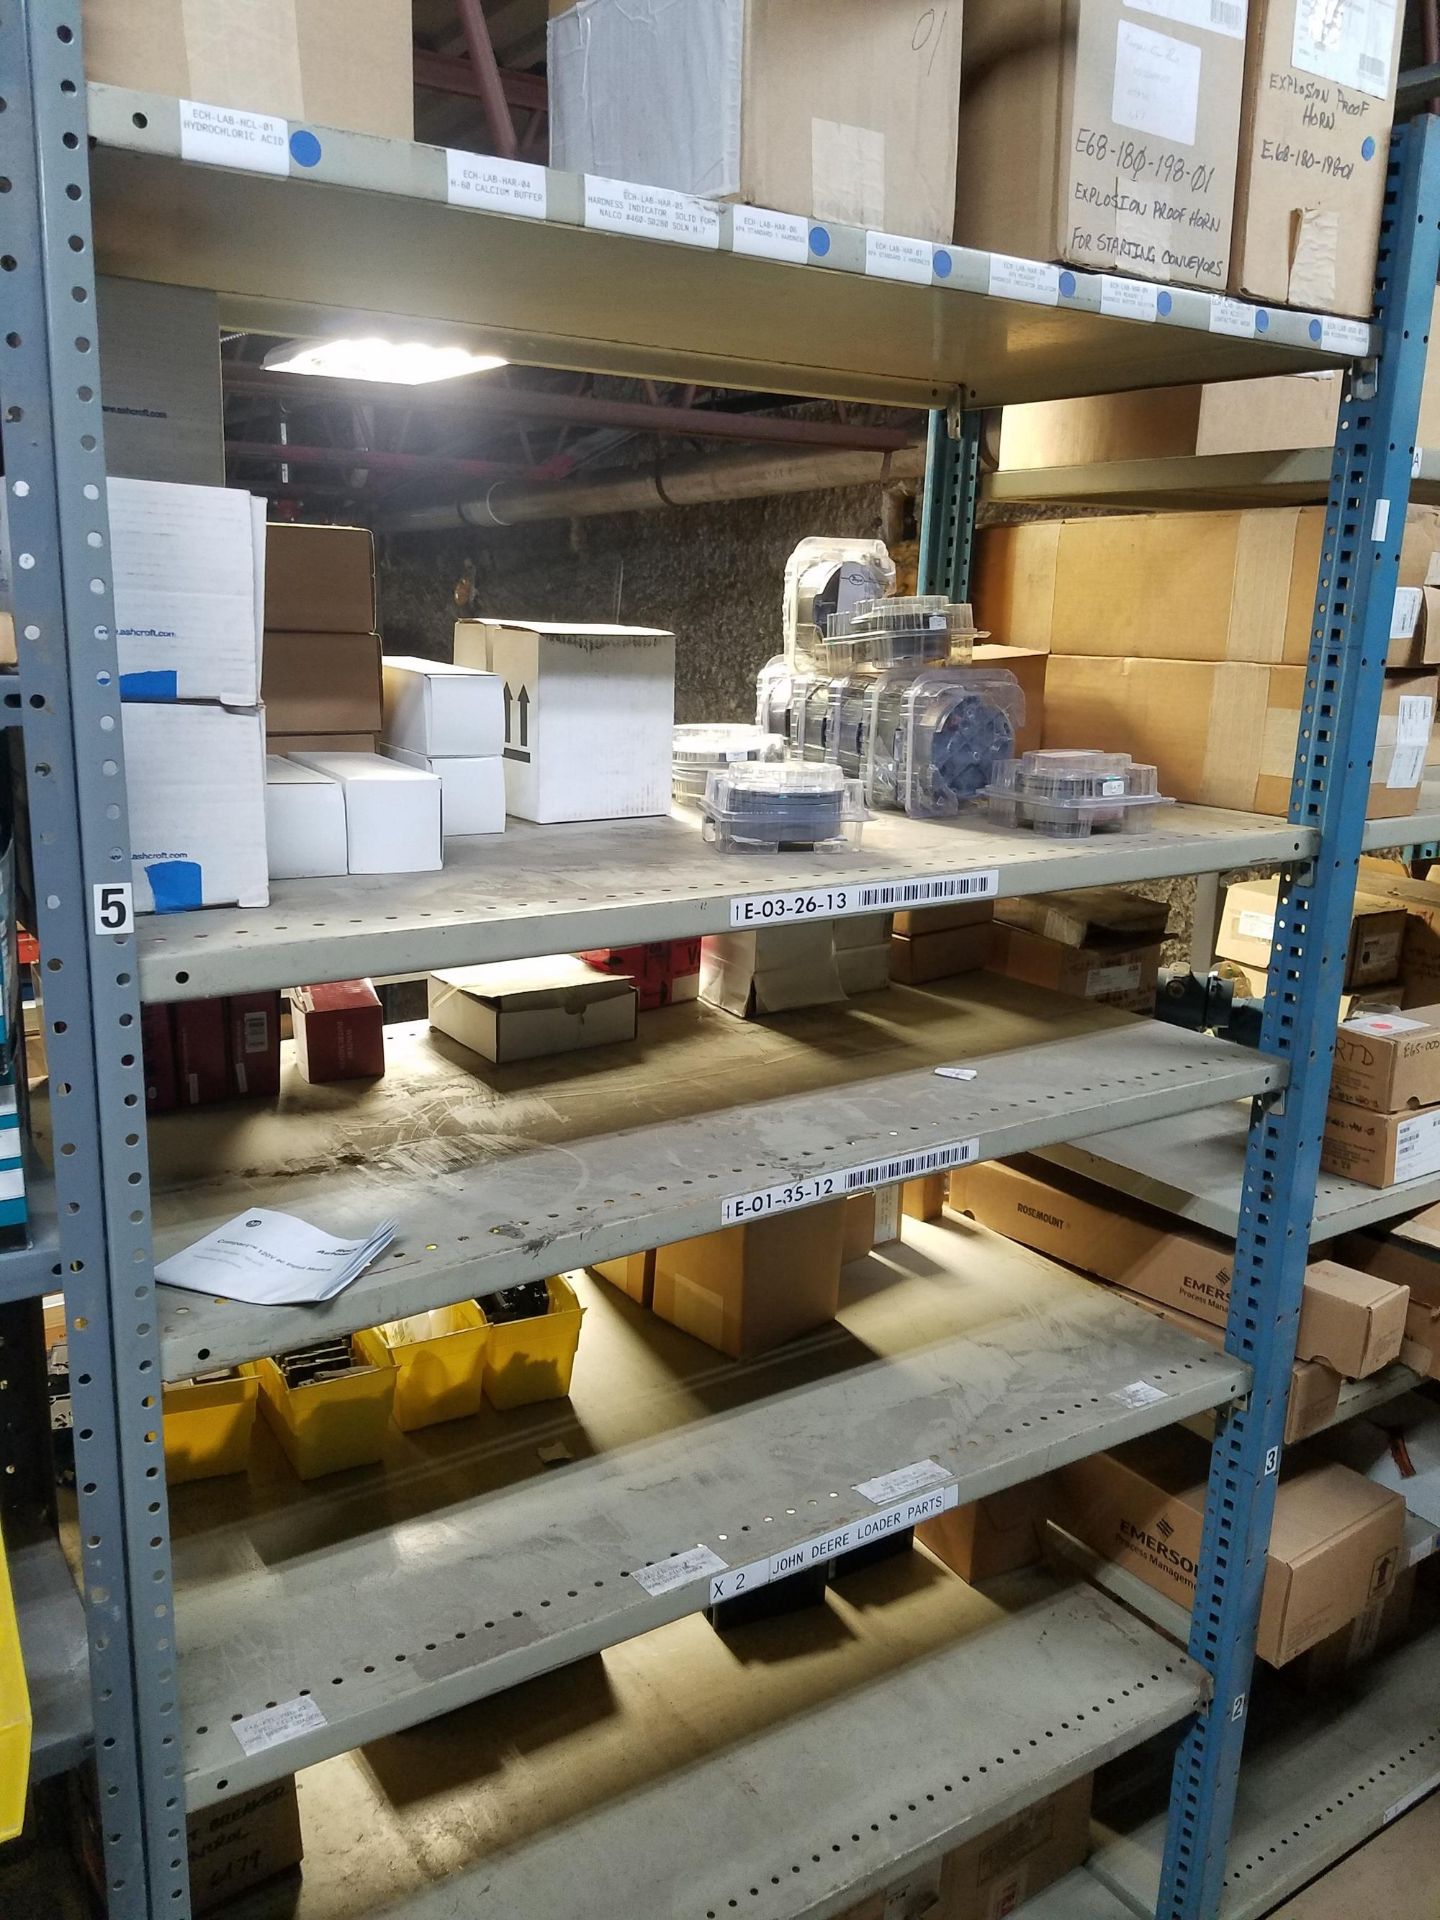 Contents of Spare Parts Storage Area On Mezzanine | Rig Fee: $400 - Image 7 of 19